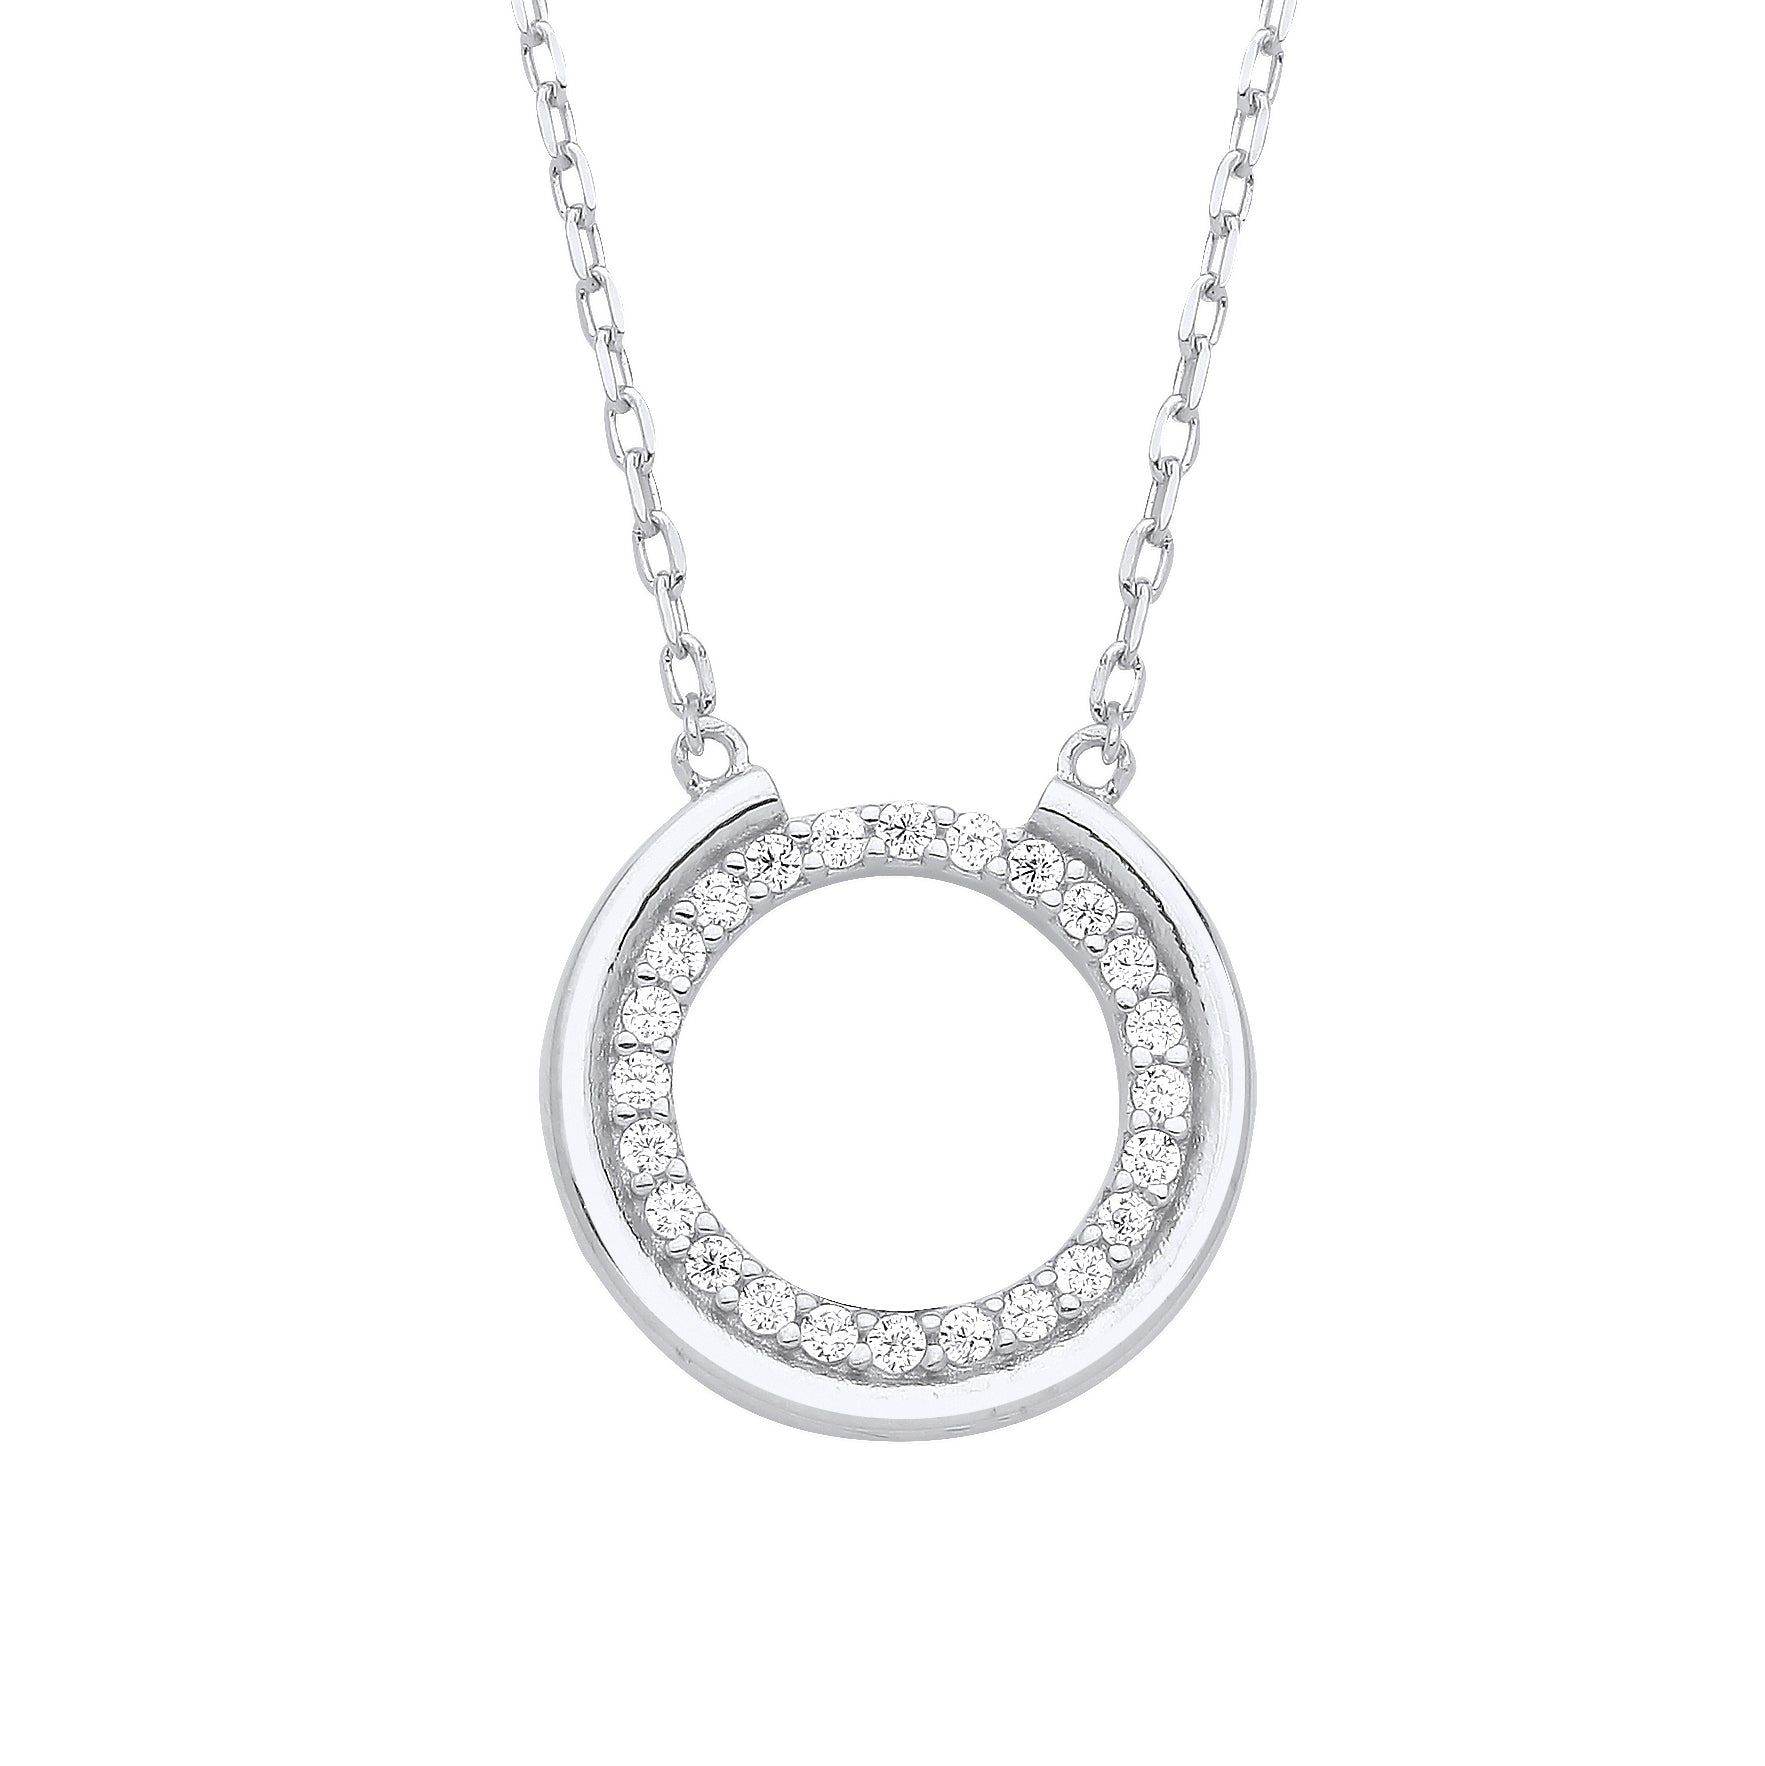 Silver  Cupped Circle of Life Lavalier Necklace - GVK387